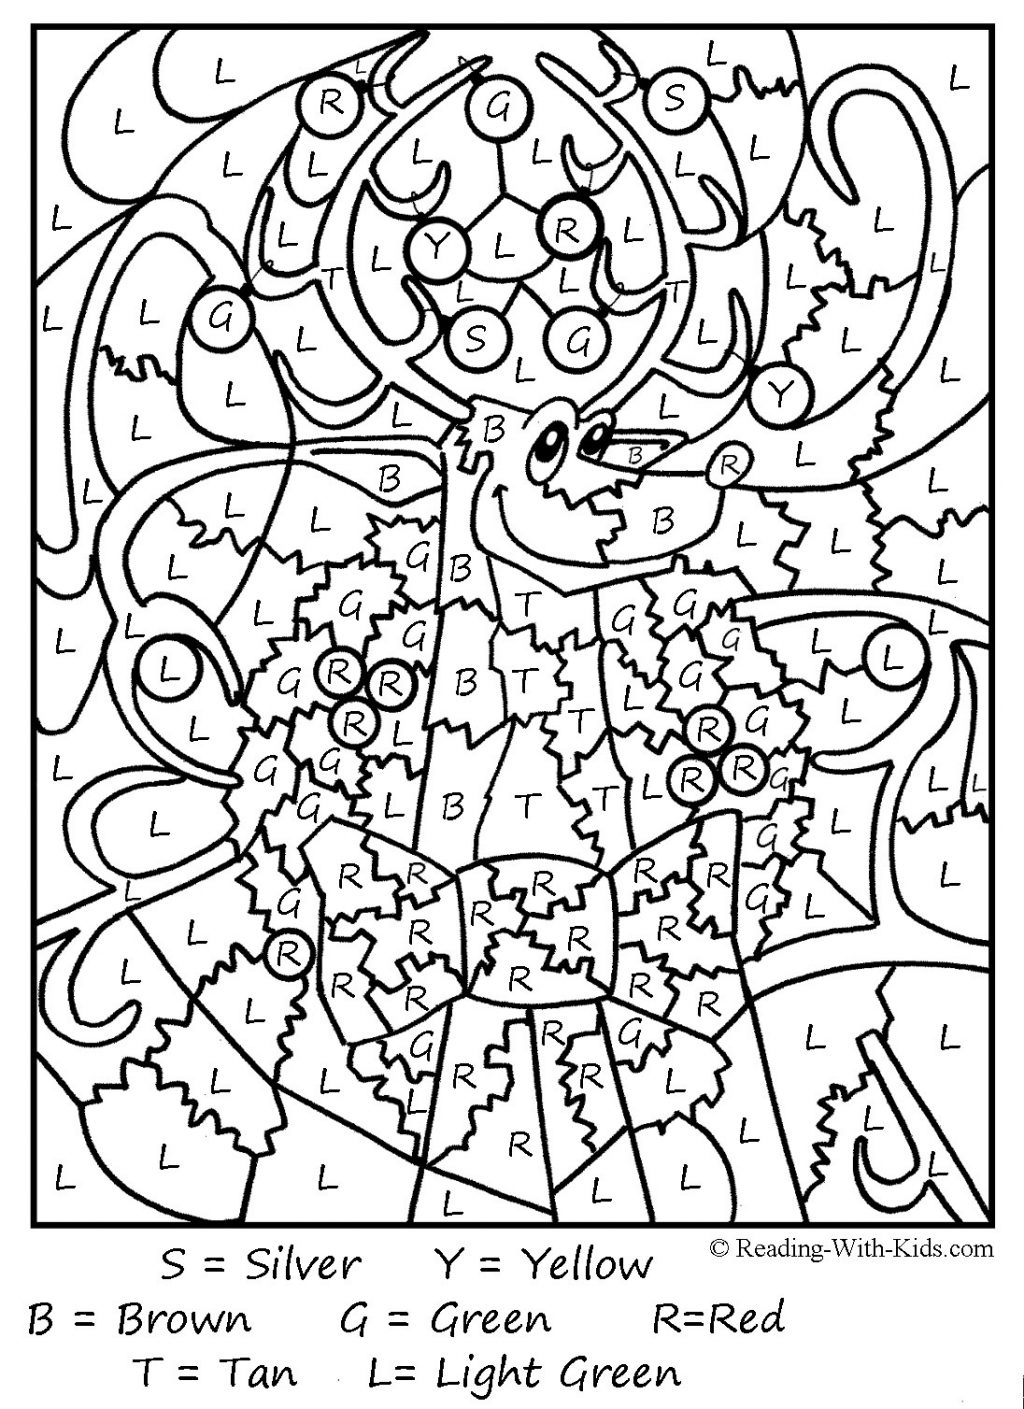 Coloring Pages : Color Byer Printables For Adults Image ...